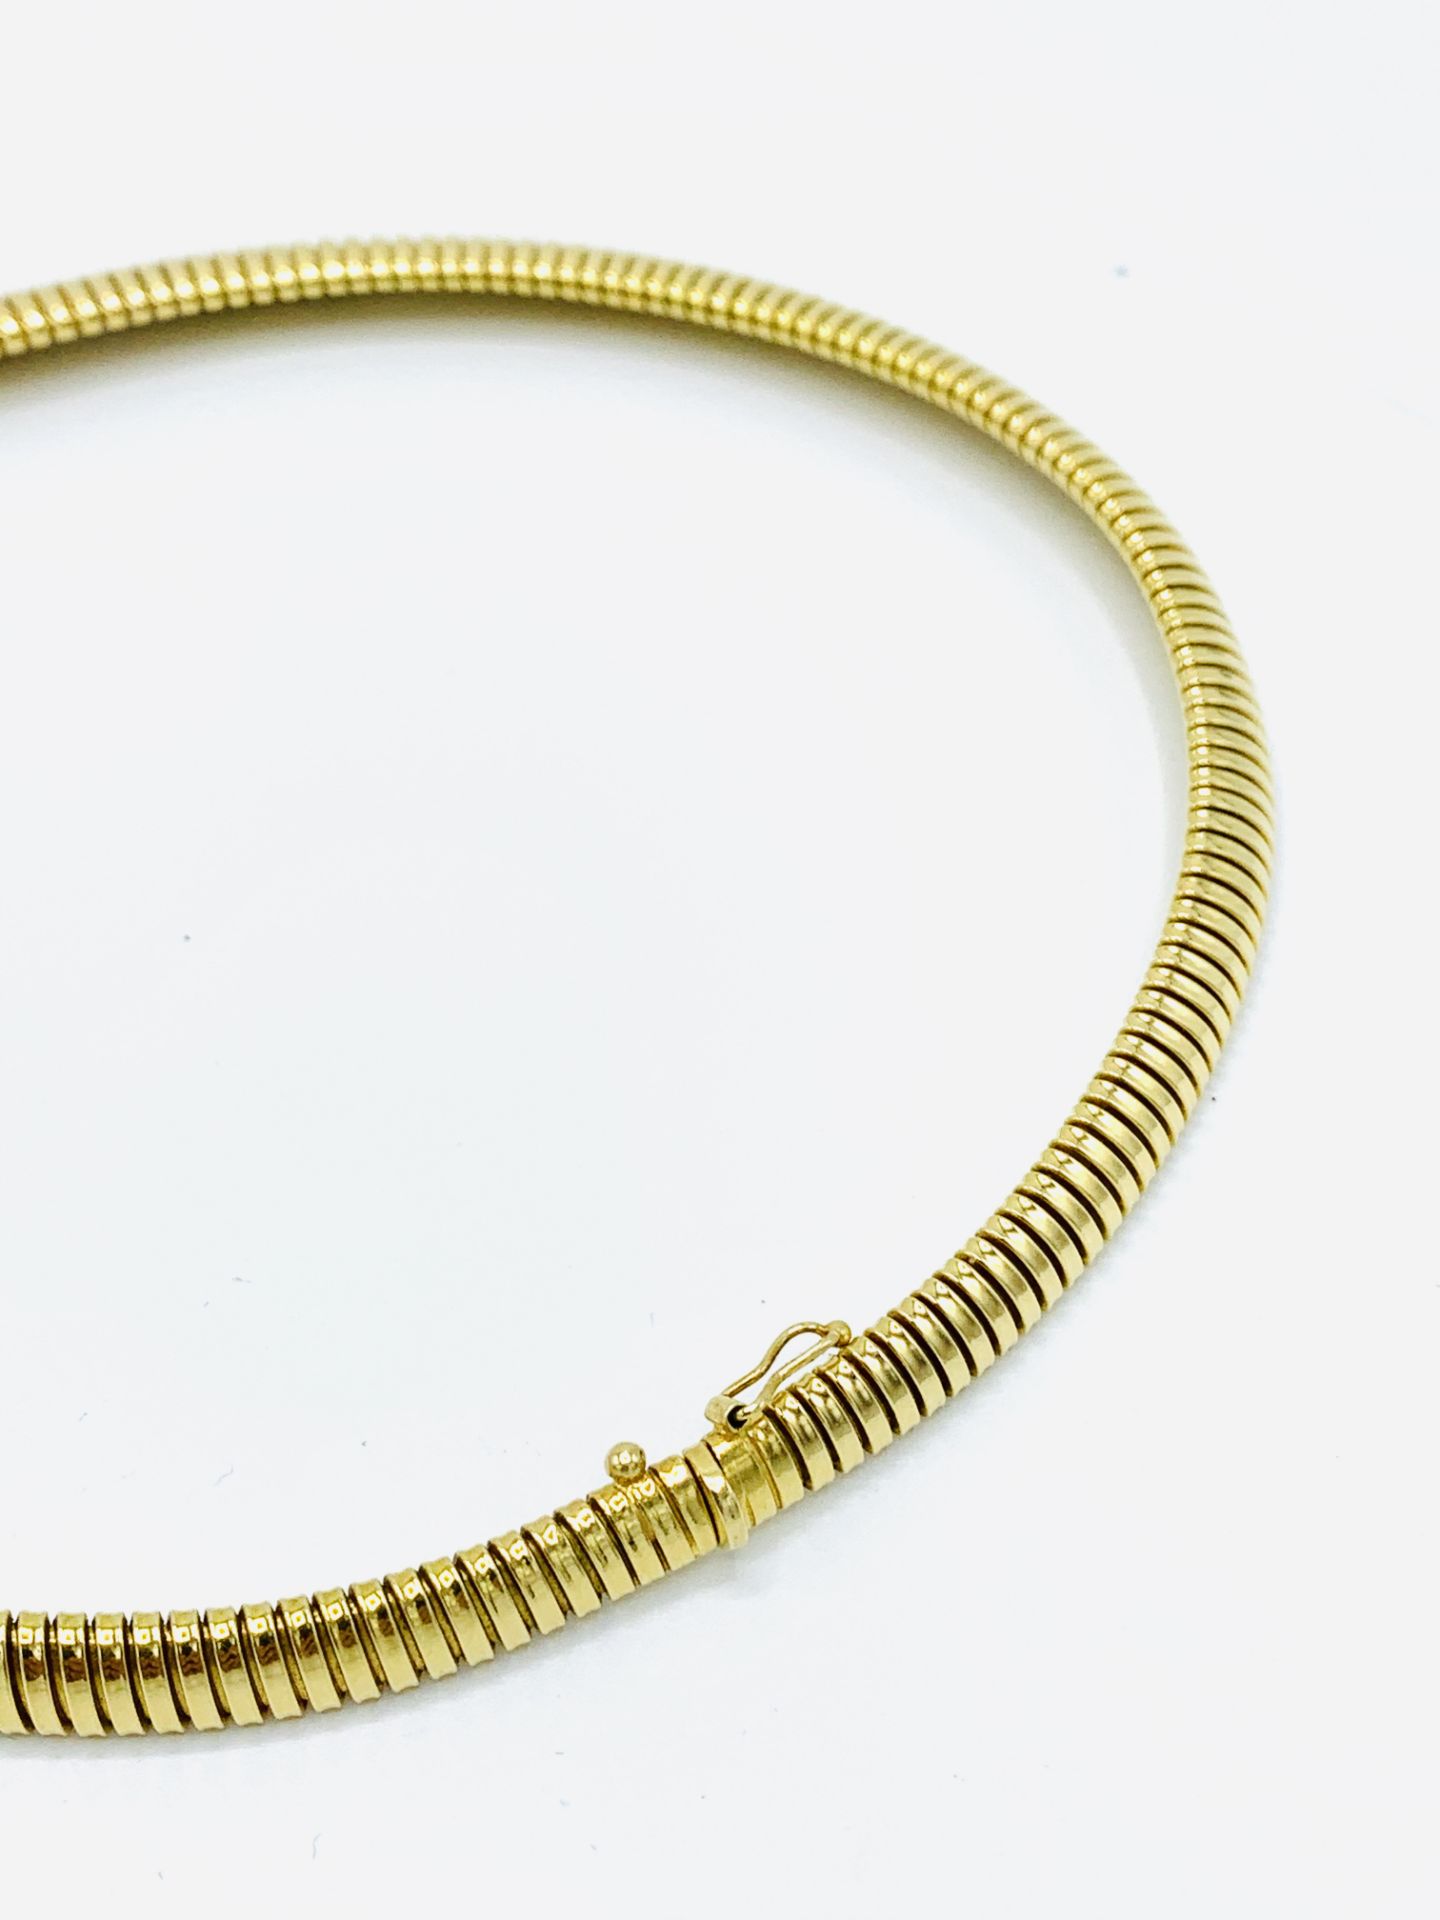 18ct gold turbogaz collar necklace. - Image 6 of 6